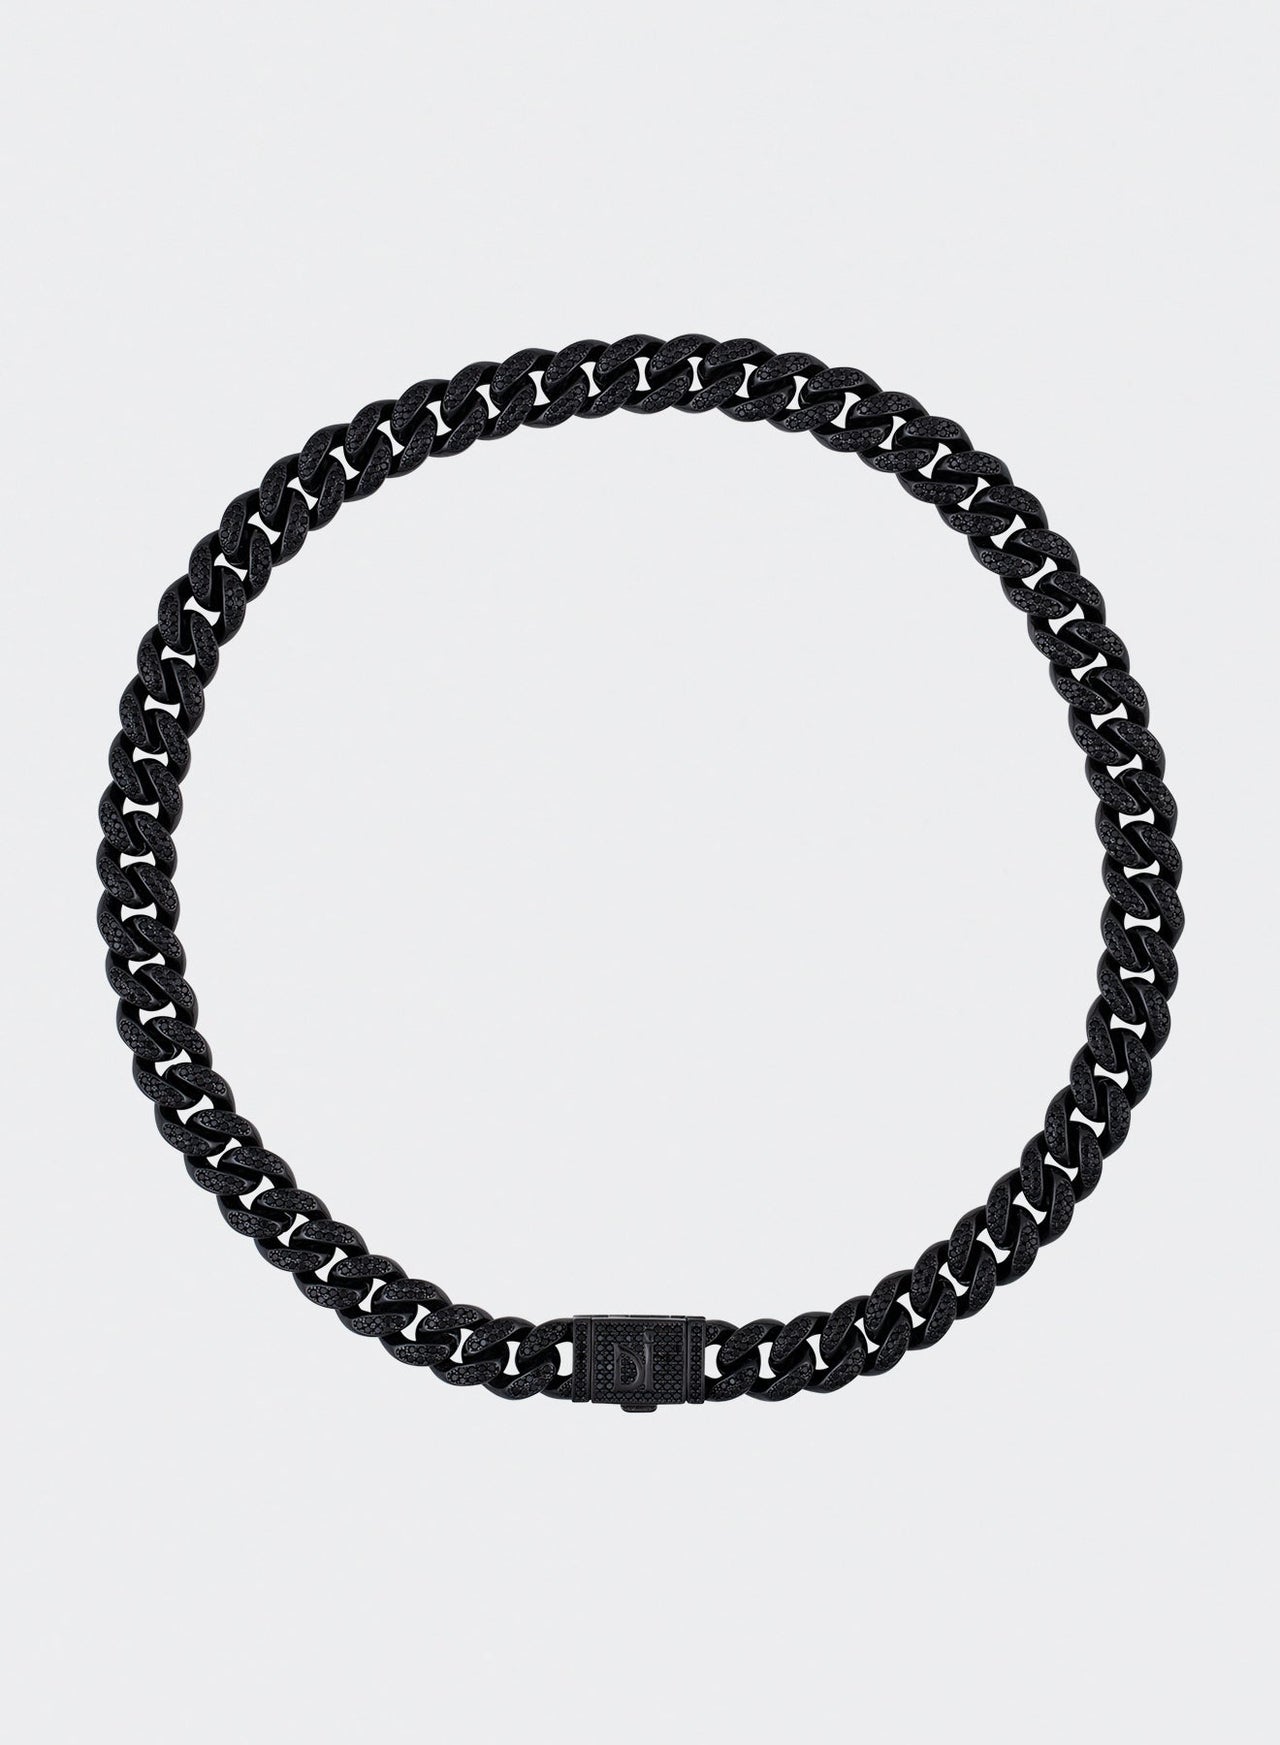 Black PVD coated cuban chain necklace with hand-set micropavé stones in black